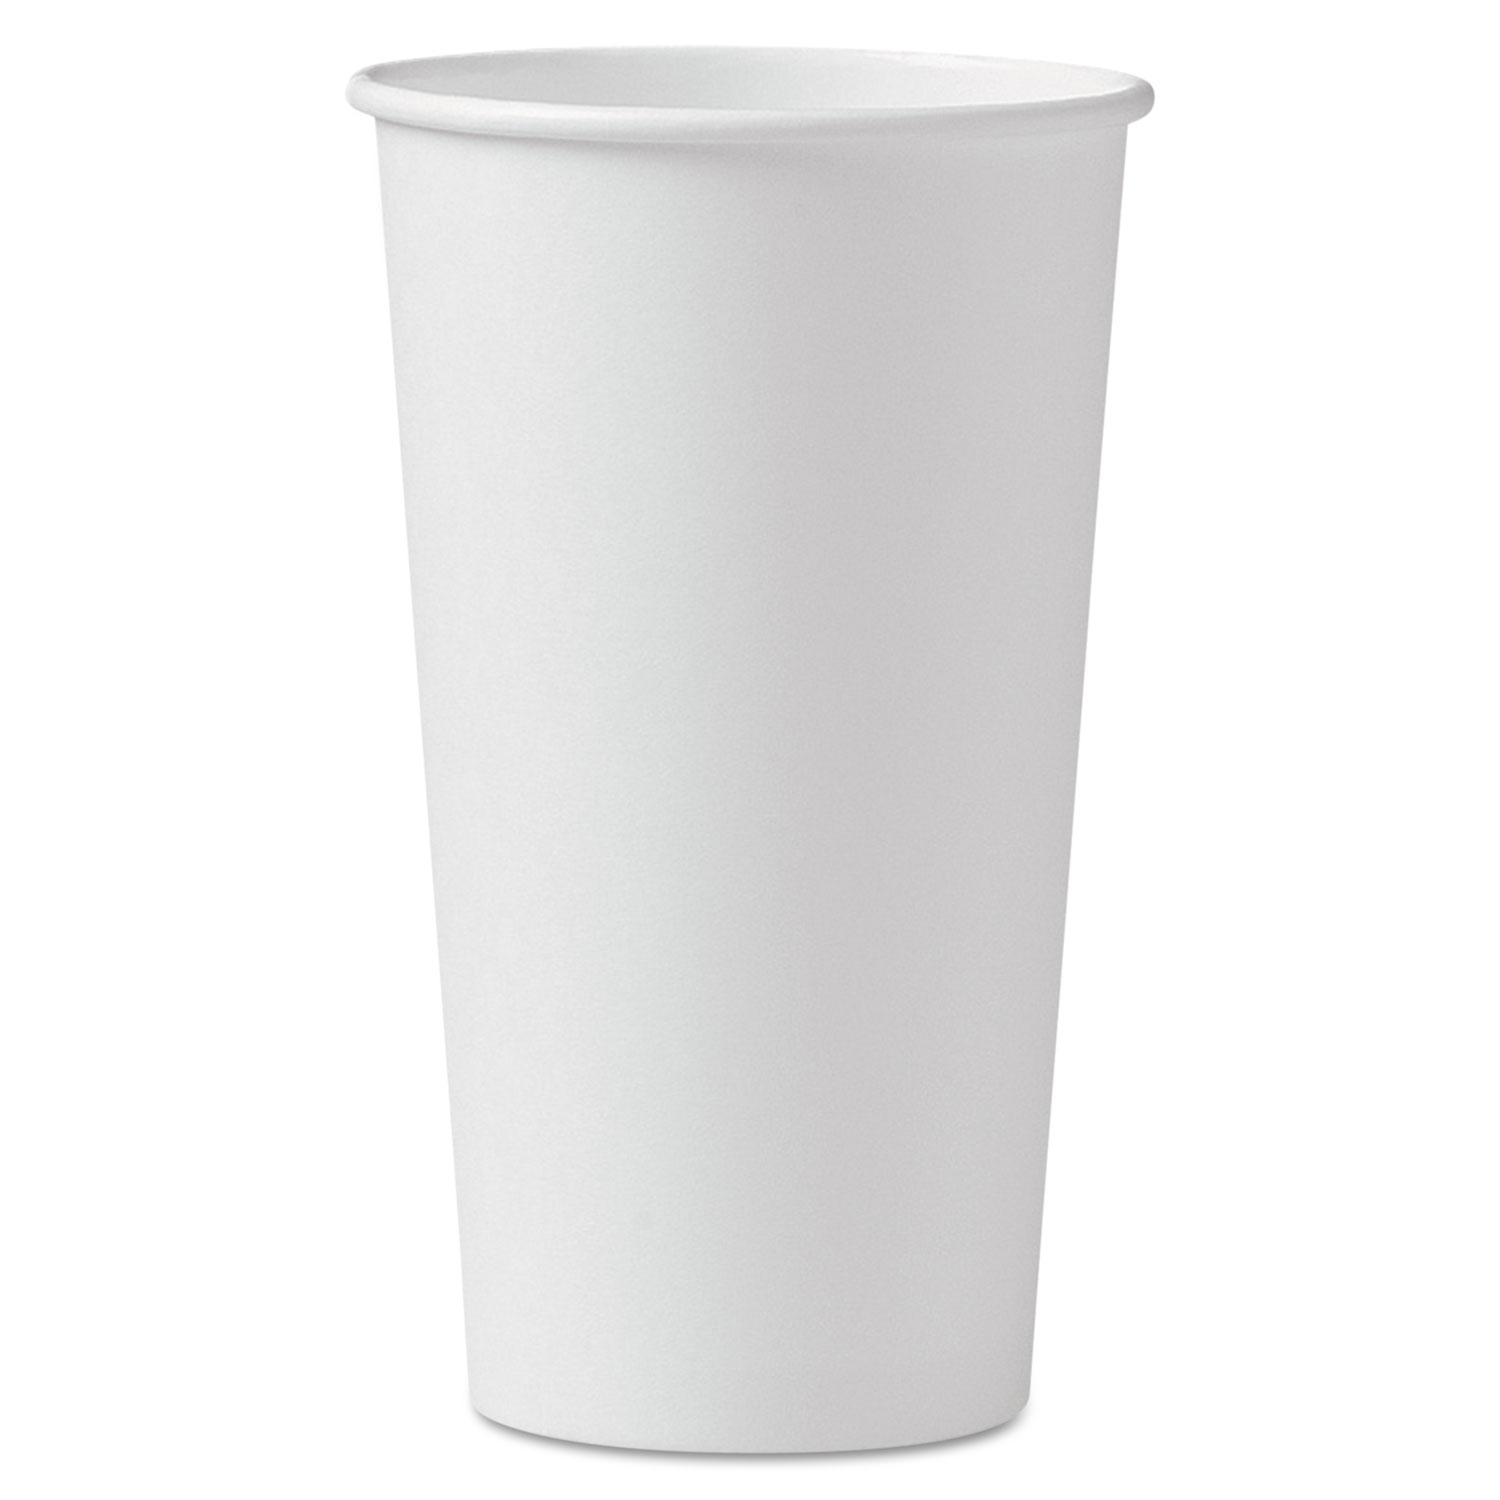 20 PAPER HOT CUP WHITE YPHC20 